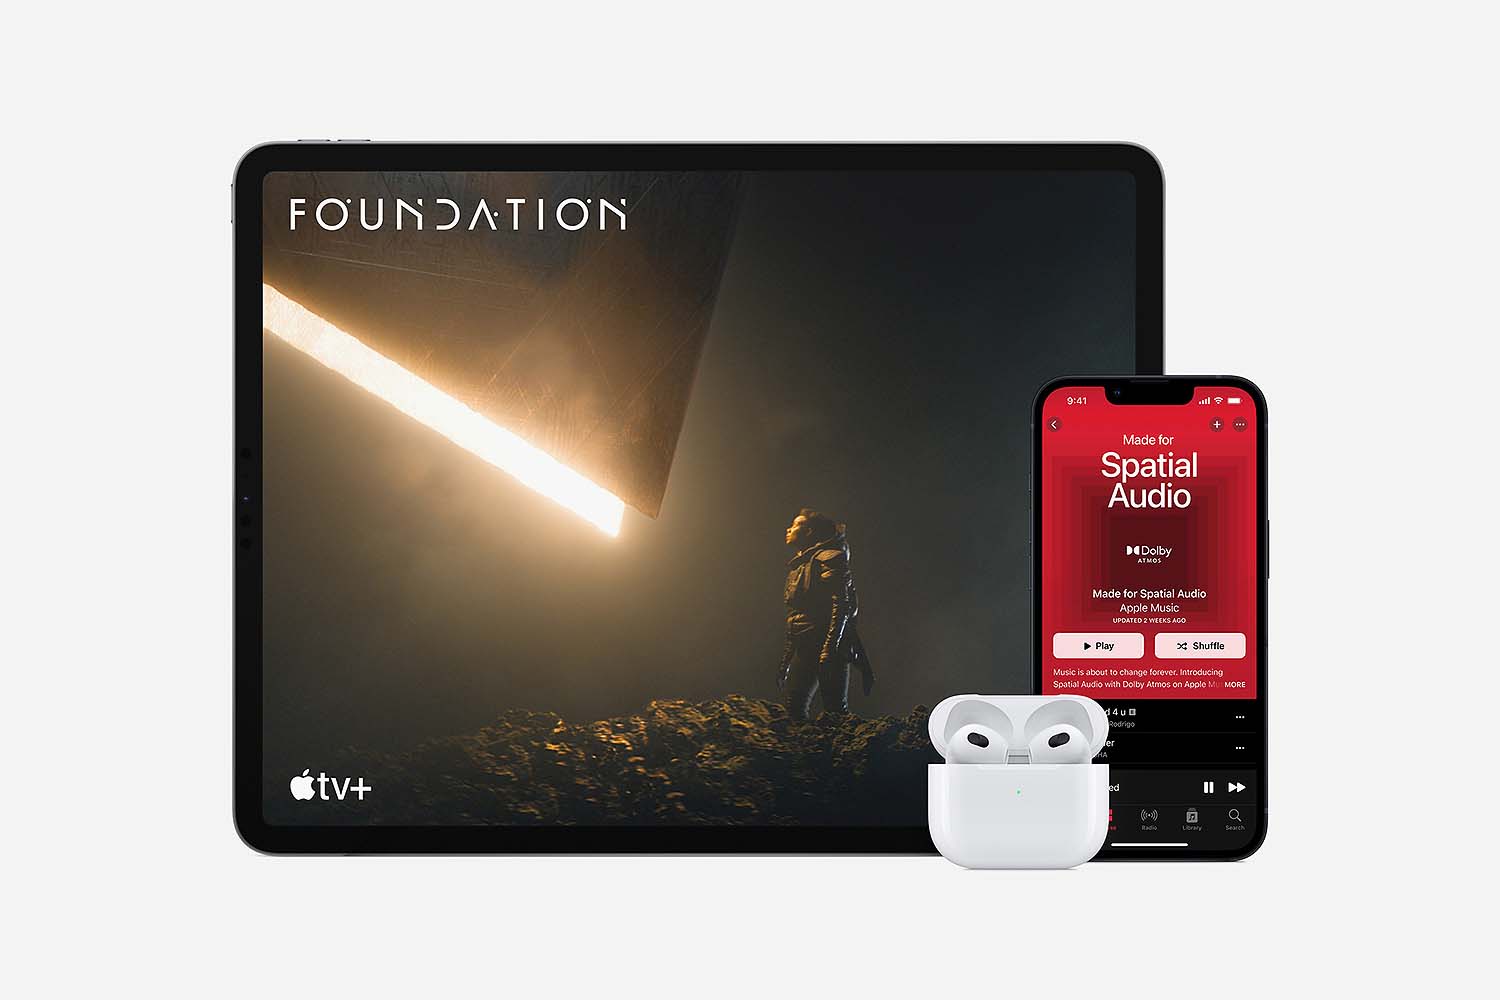 The third gen of AirPods, now with spatial audio, near an iPad and iPhone playing the Apple TV show "Foundation"